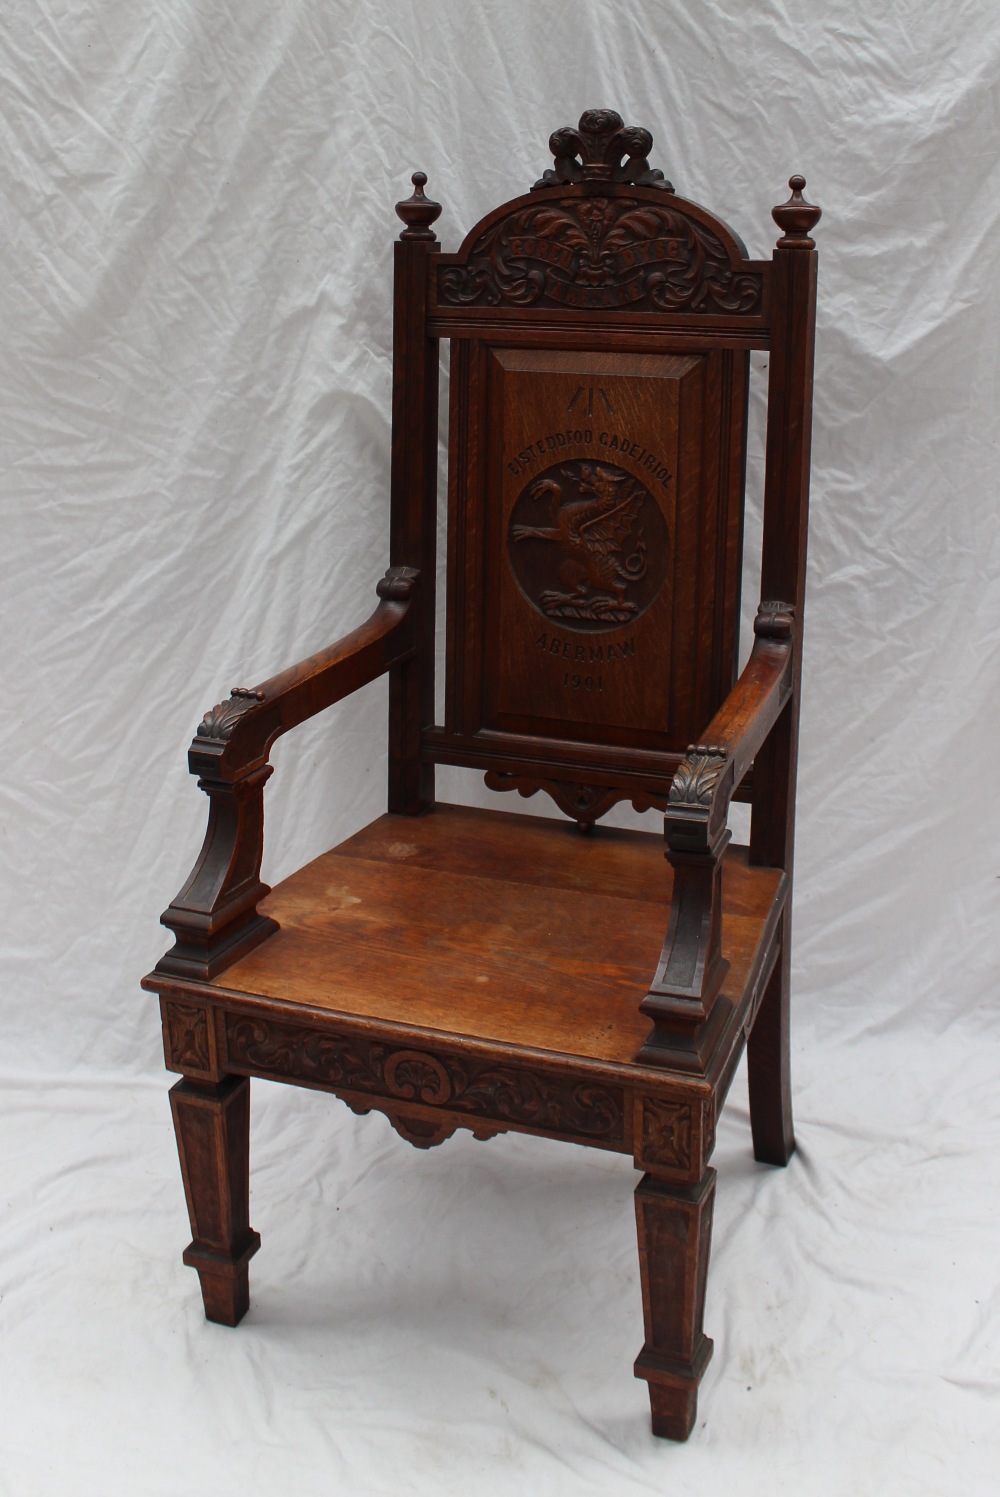 An early 20th century oak Eisteddfod Chair, carved with the Prince of Wales feathers to the top, the